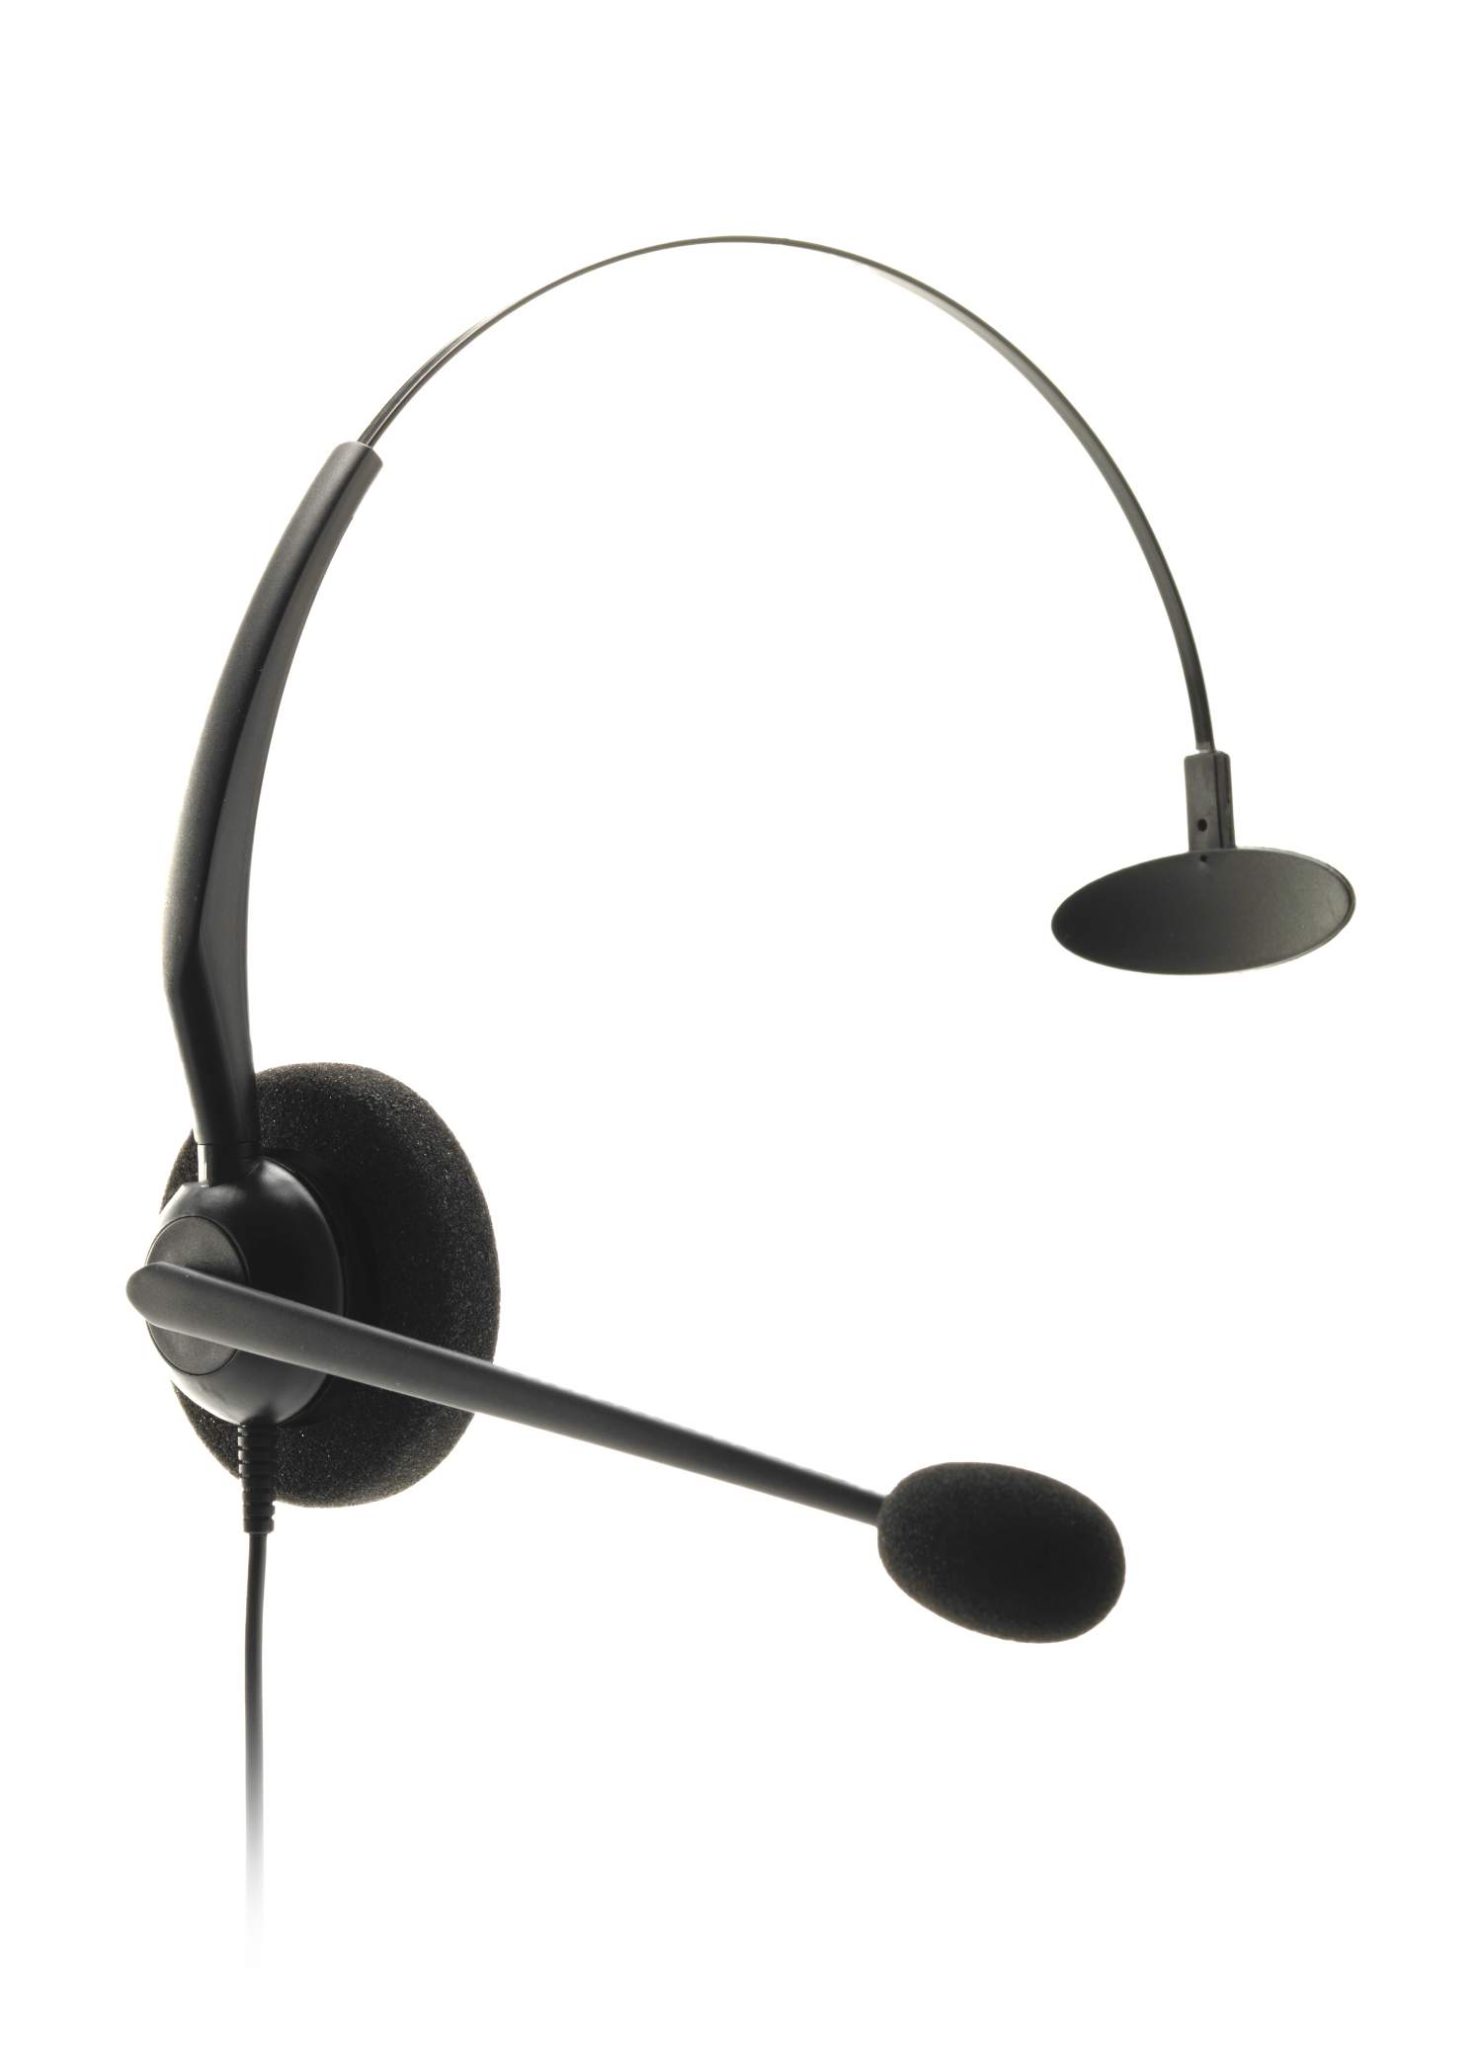 jpl 100 product image - JPL 100 Office Headset Review